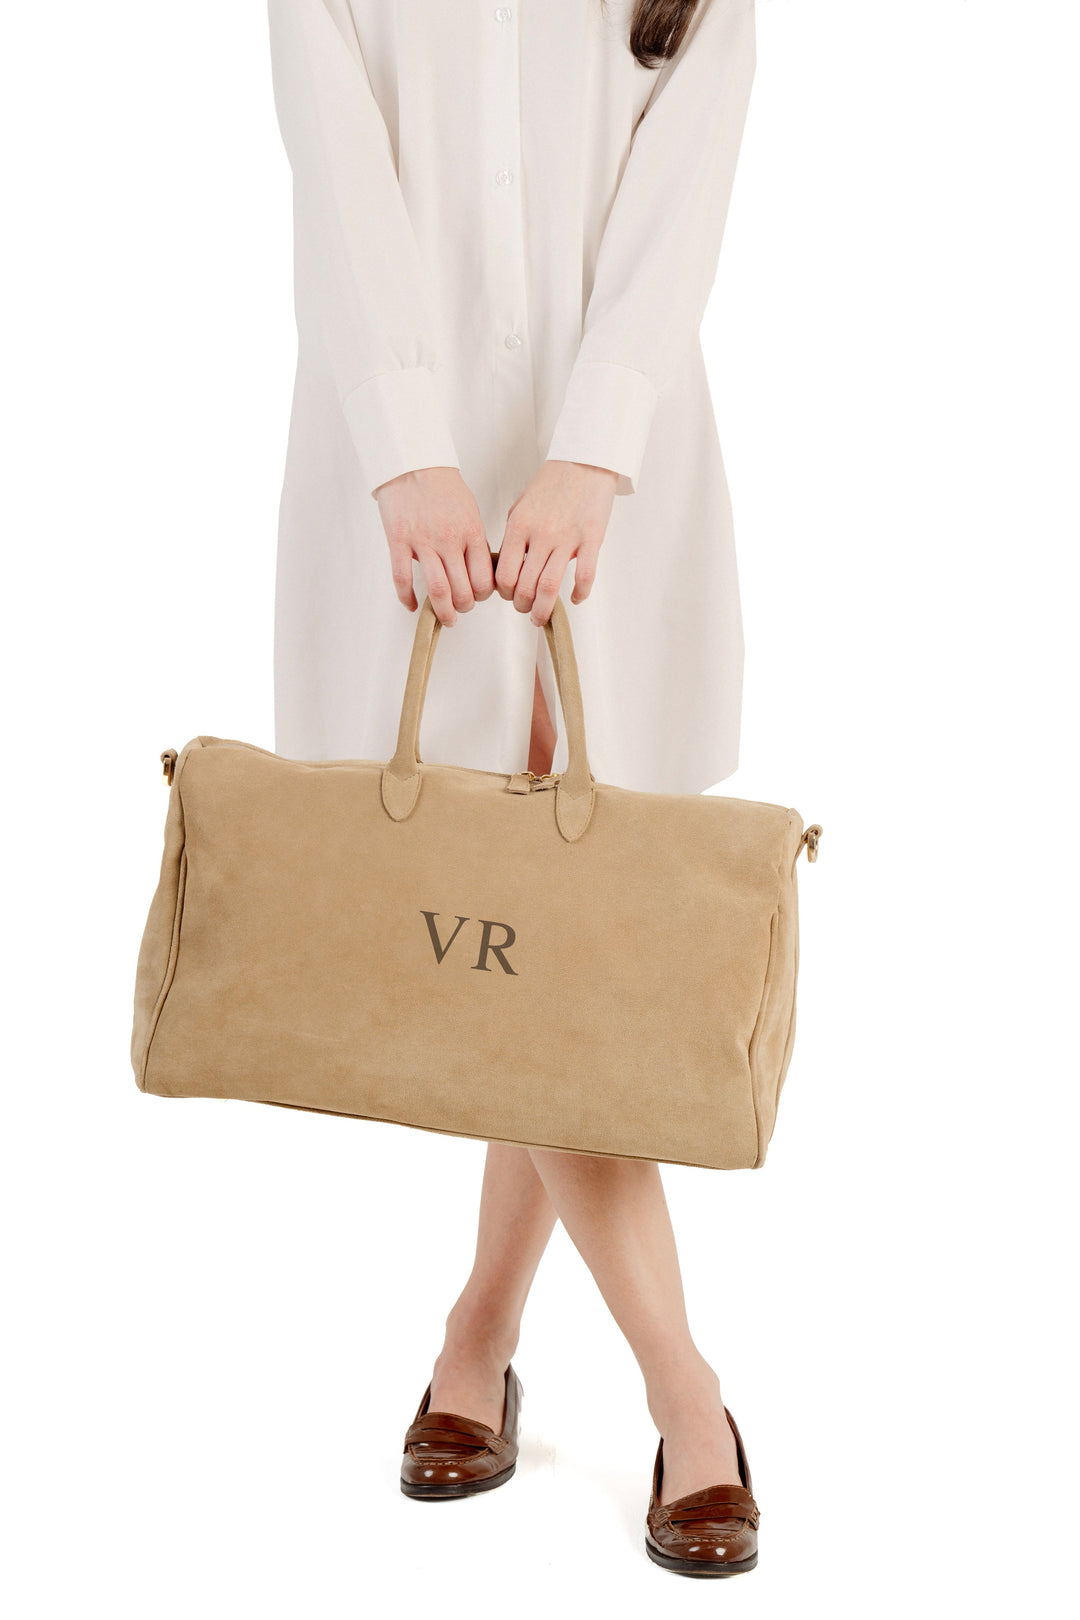 Person holding a beige leather duffel bag with initials VR on it, wearing a white shirt and brown shoes